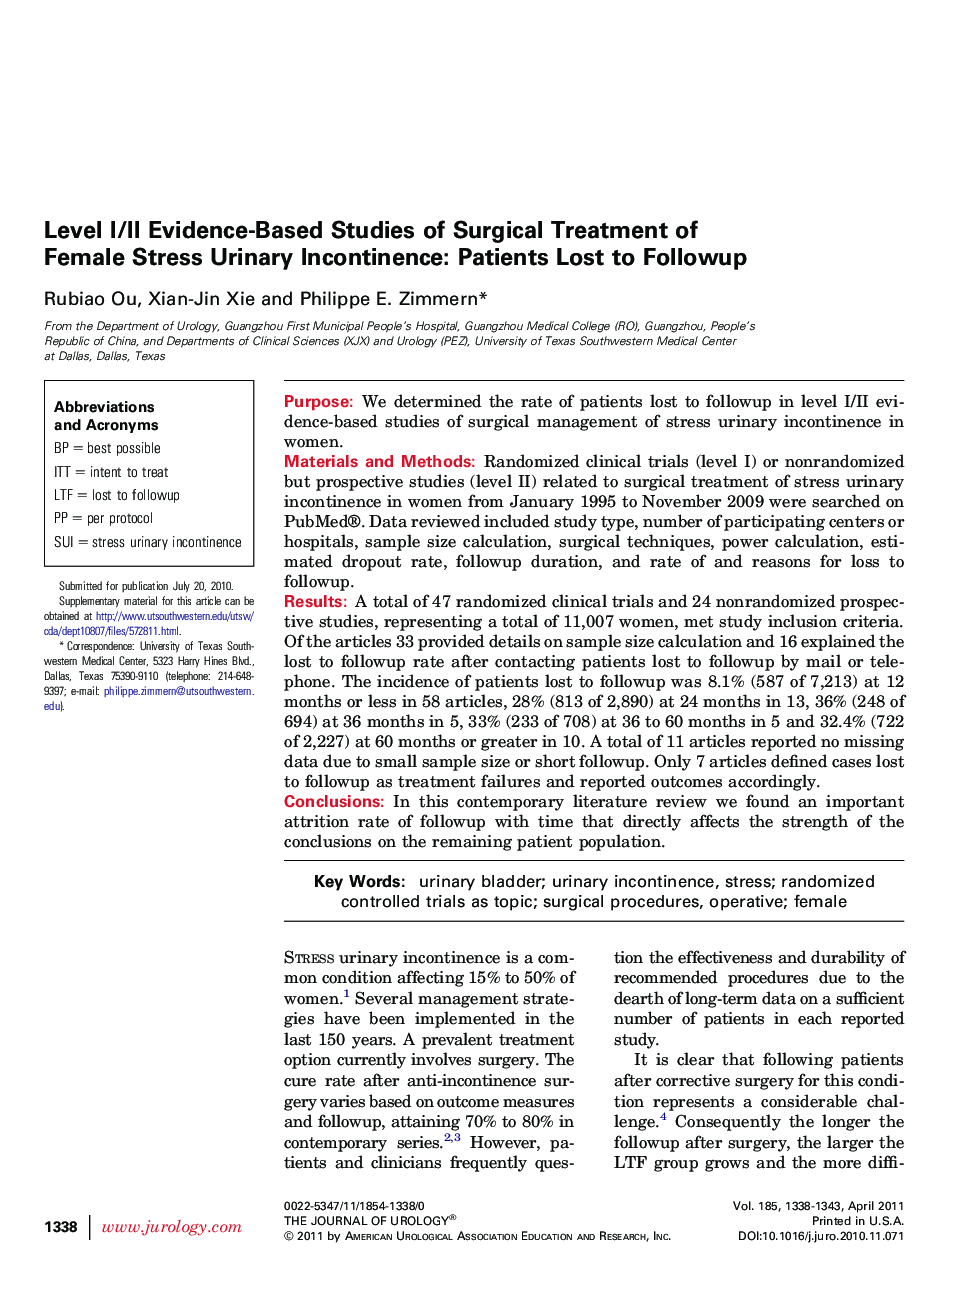 Level I/II Evidence-Based Studies of Surgical Treatment of Female Stress Urinary Incontinence: Patients Lost to Followup 